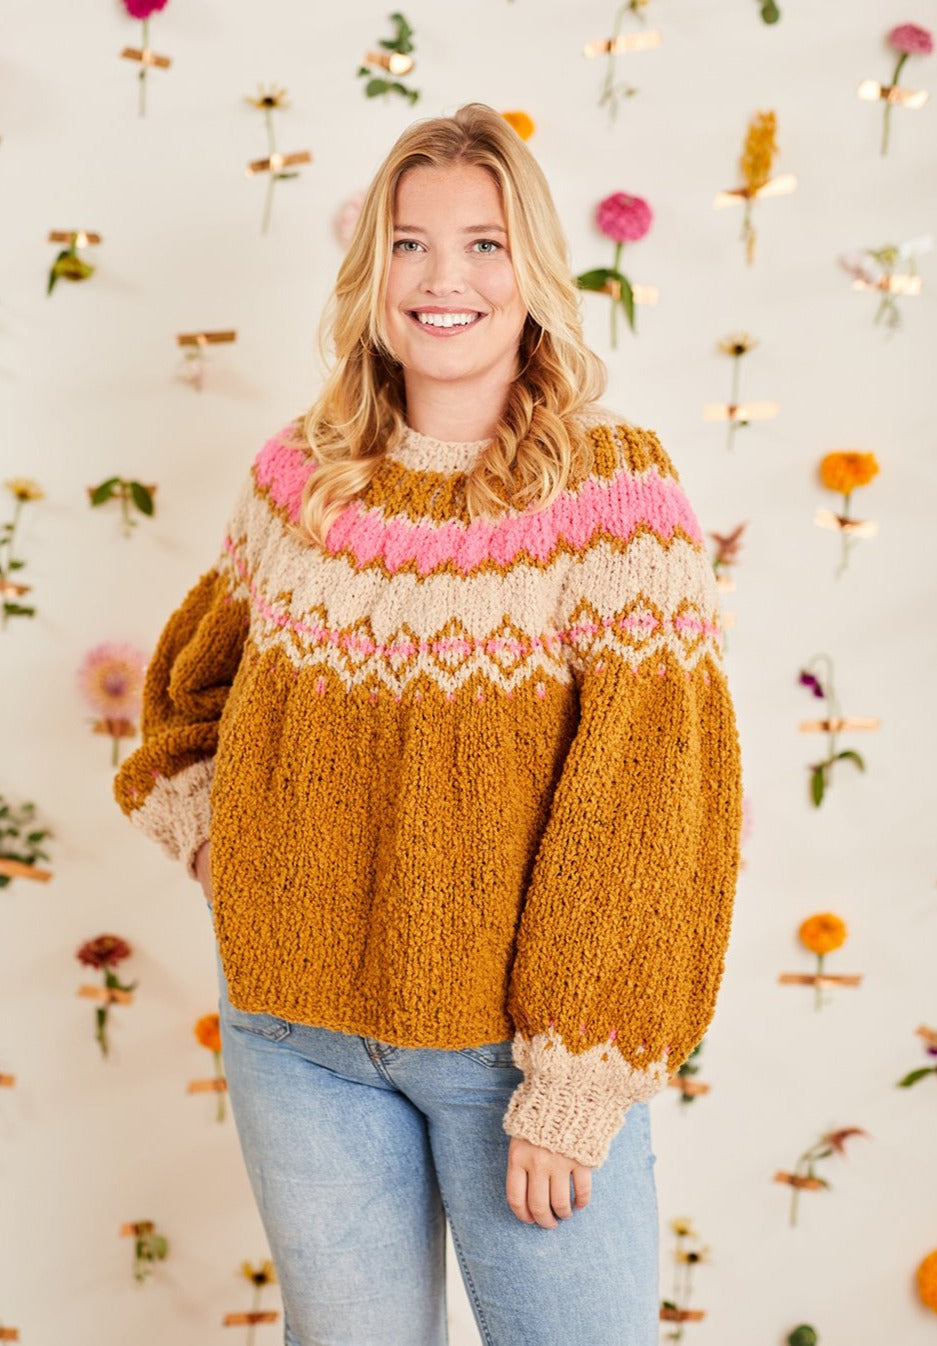 Express Yourself Sweater Pattern